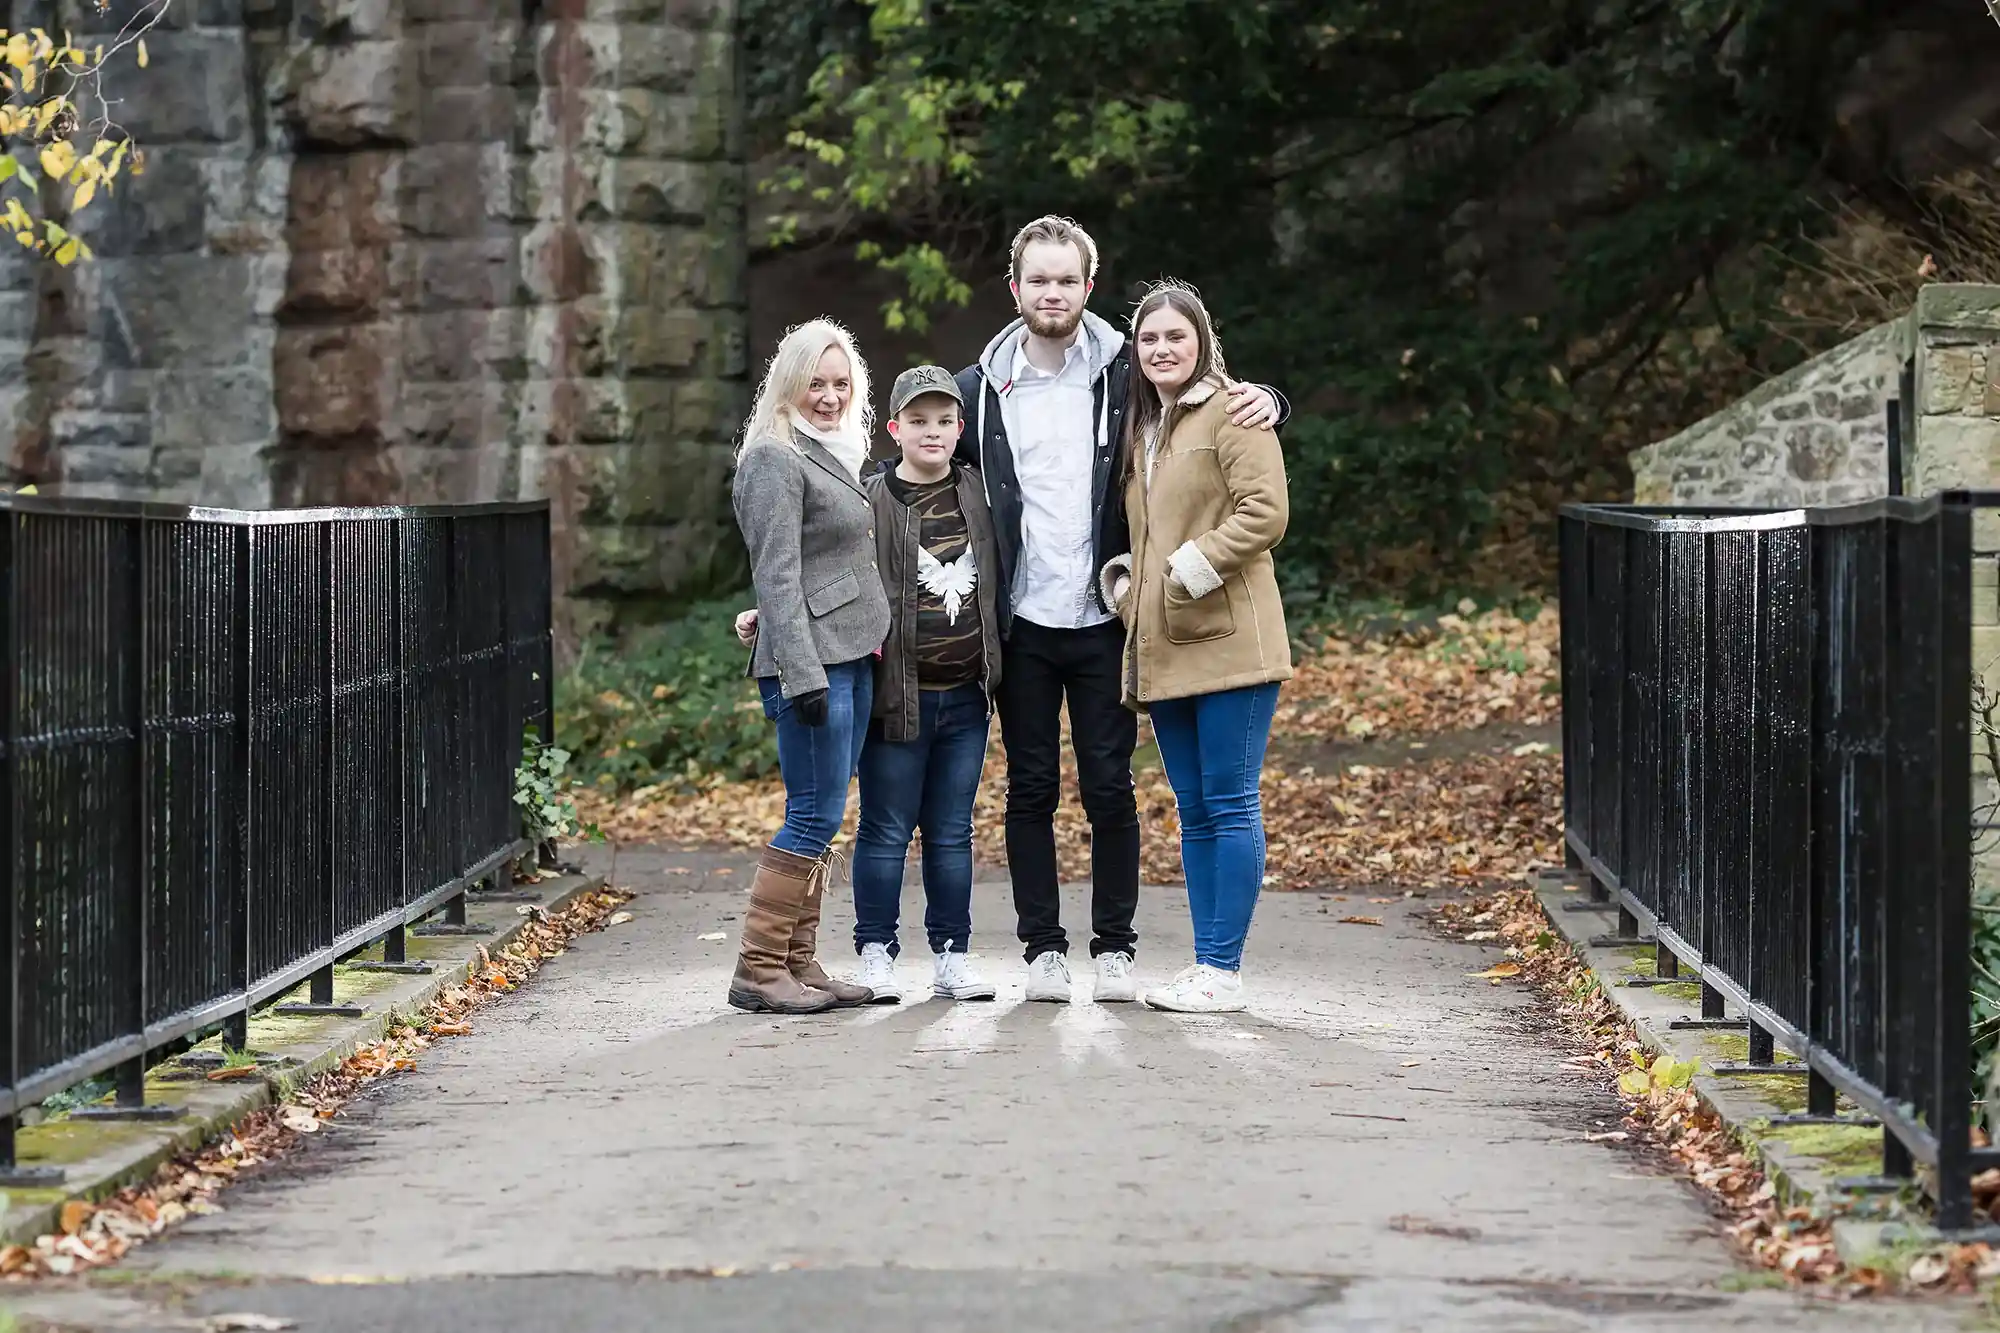 A group of four people, two adults and two children, stand together on a narrow path between railings, with greenery and a stone structure in the background.